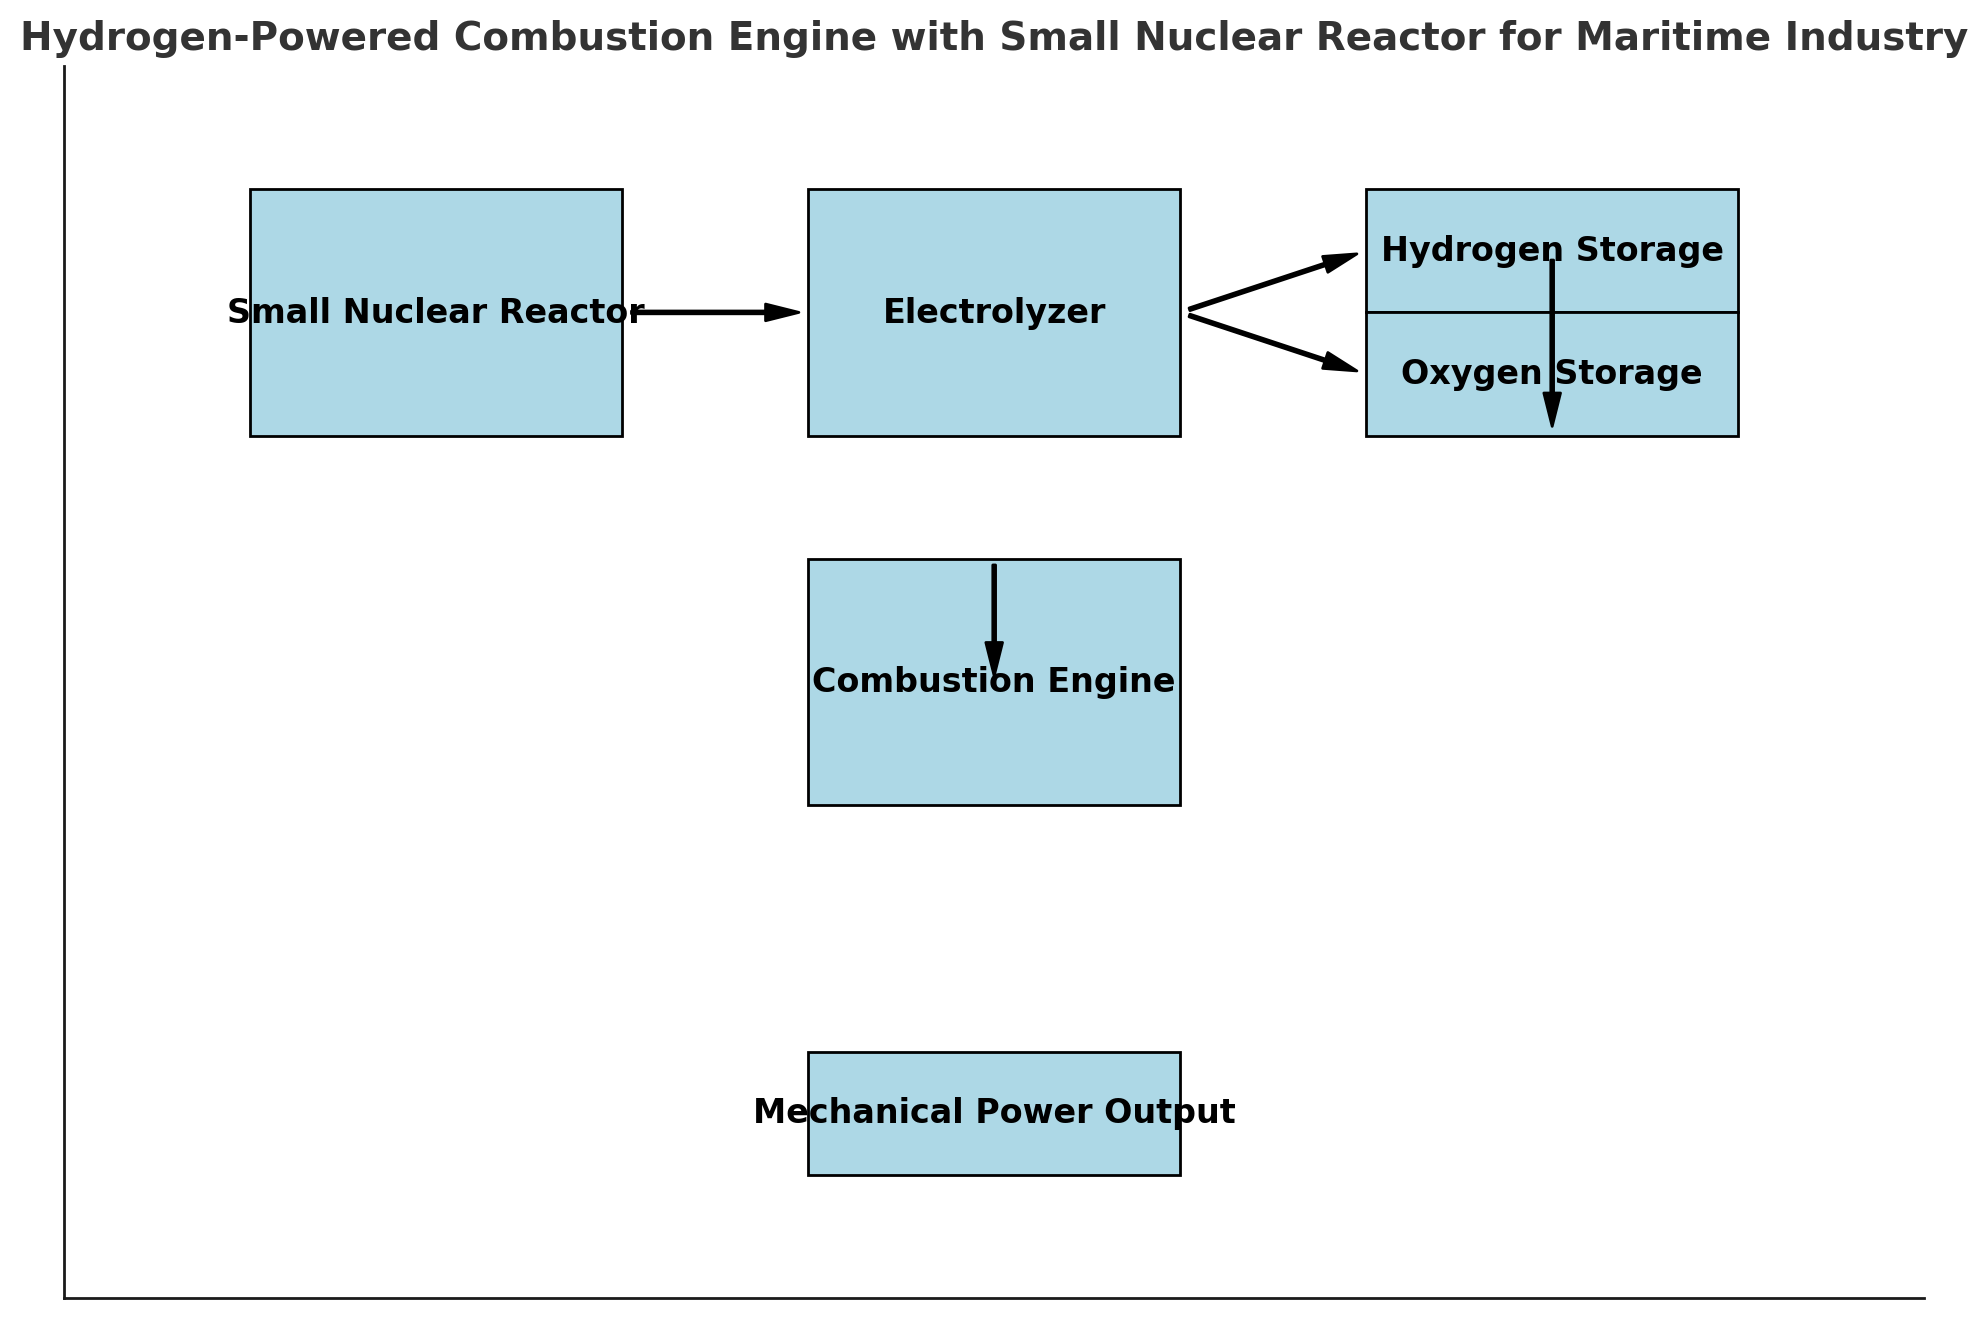 Hydrogen-Powered Combustion Engines Combined with Small Nuclear Reactors